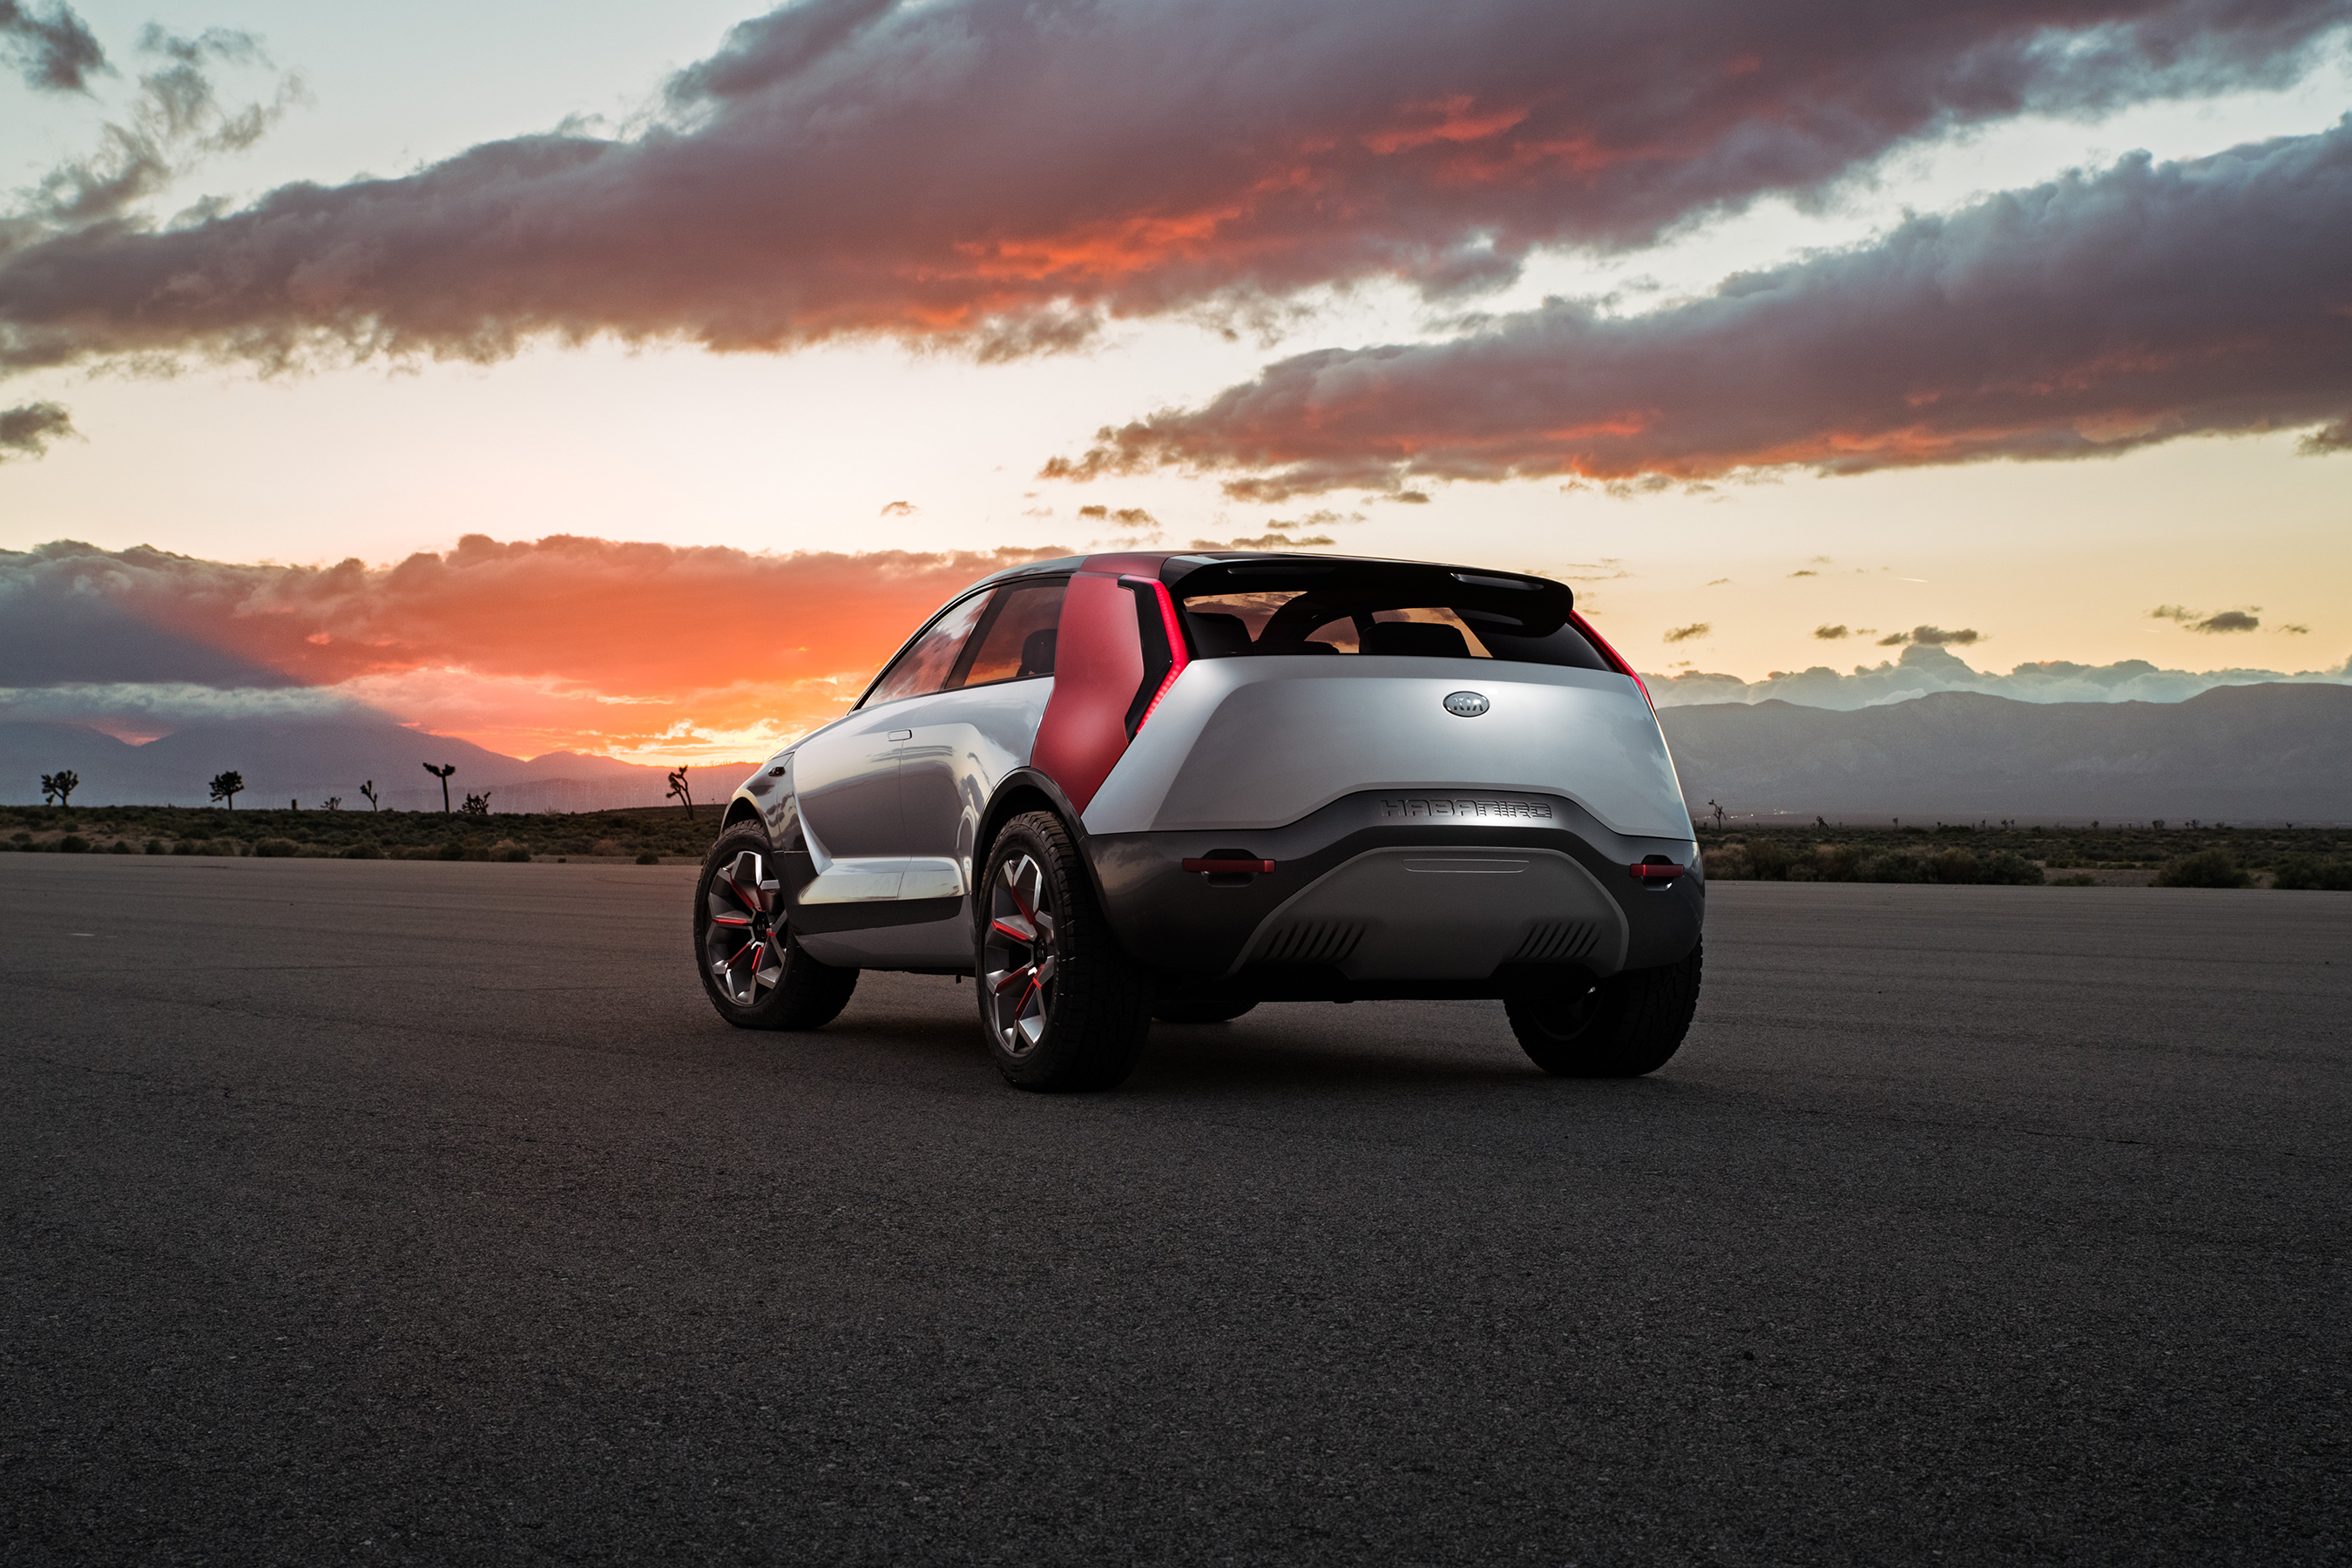 Spicy Kia HabaNiro concept represents the brands vision for the future of electric vehicles.